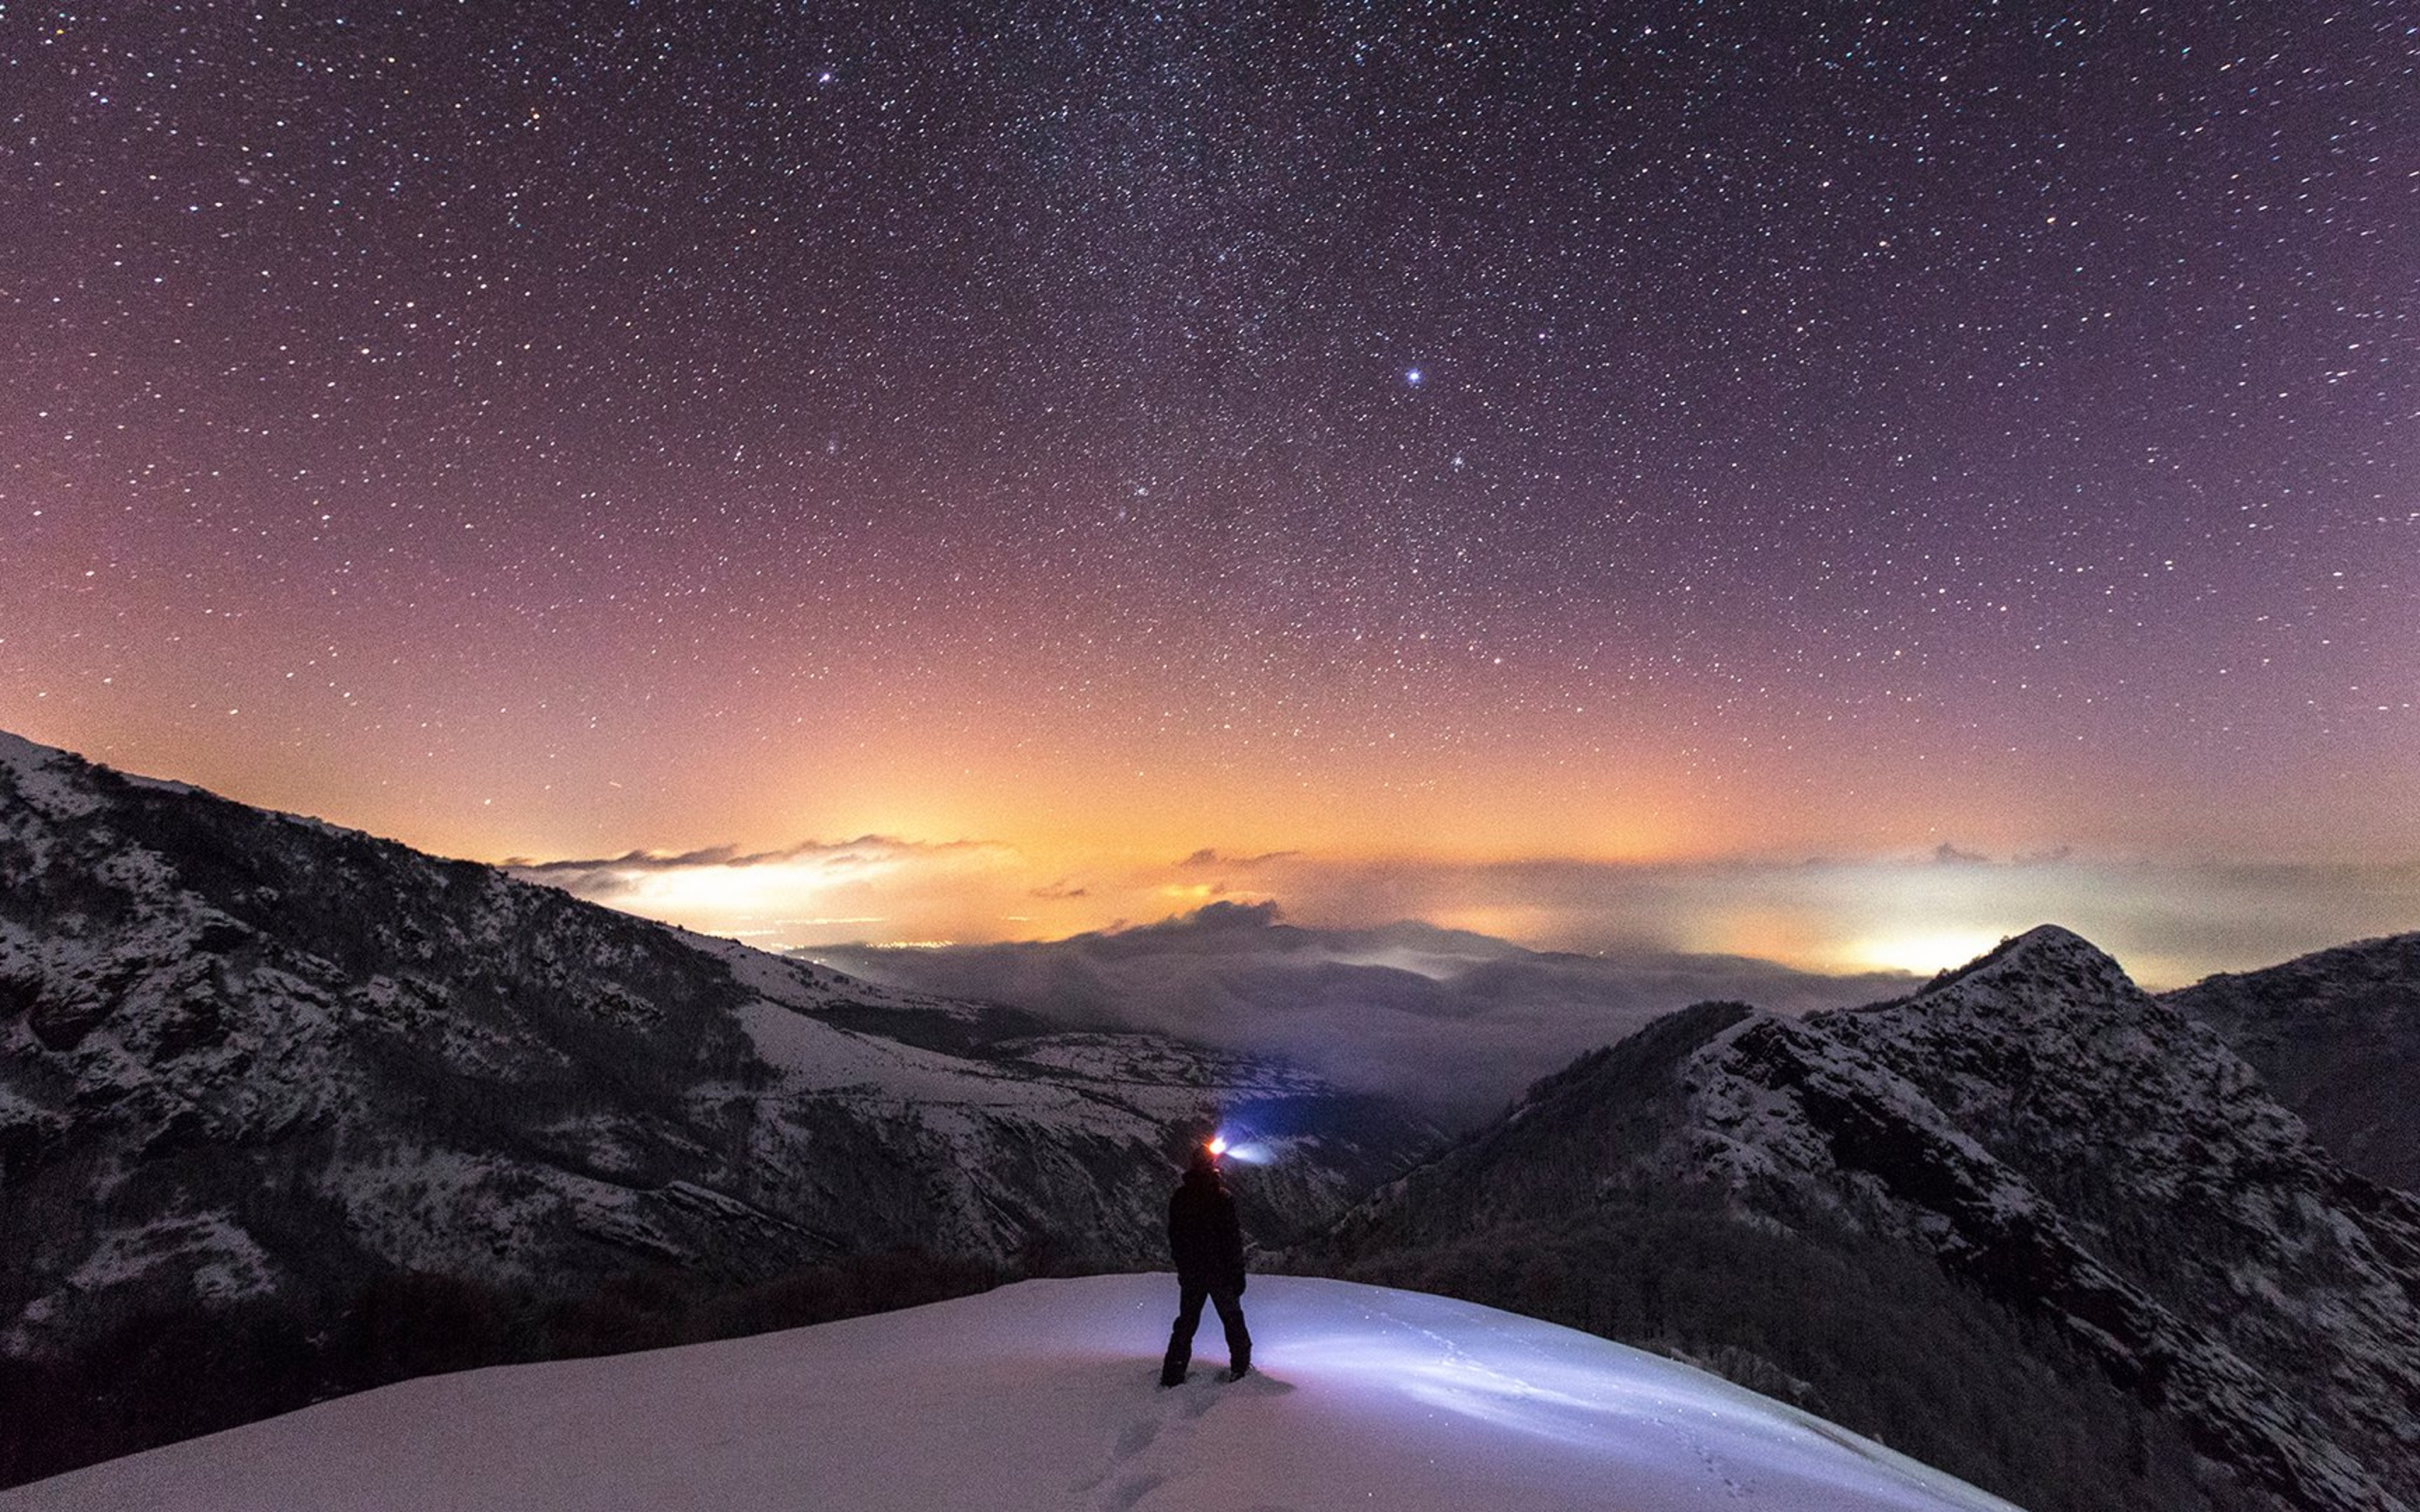 Person on mountain summit with night sky